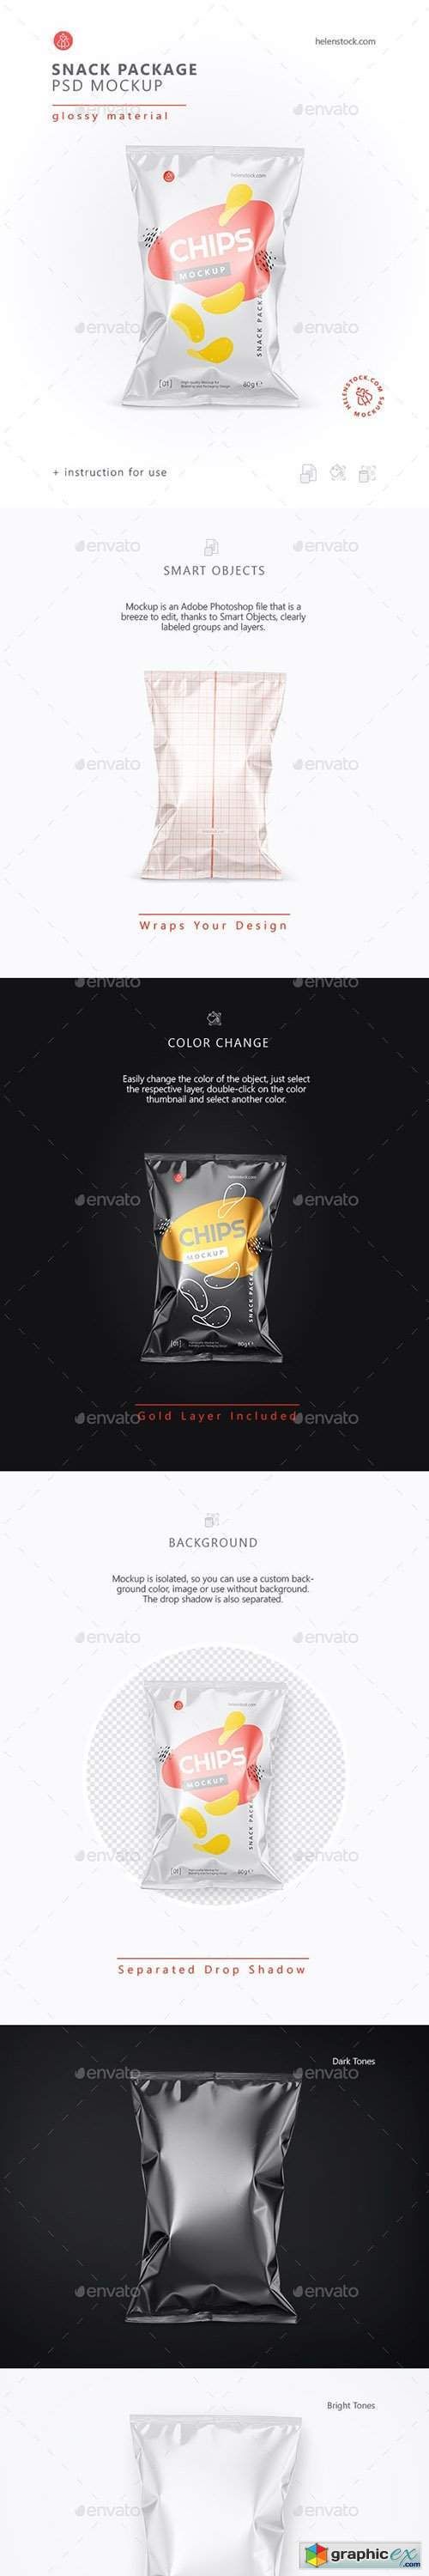 Glossy Snack Package Mockup - Front View